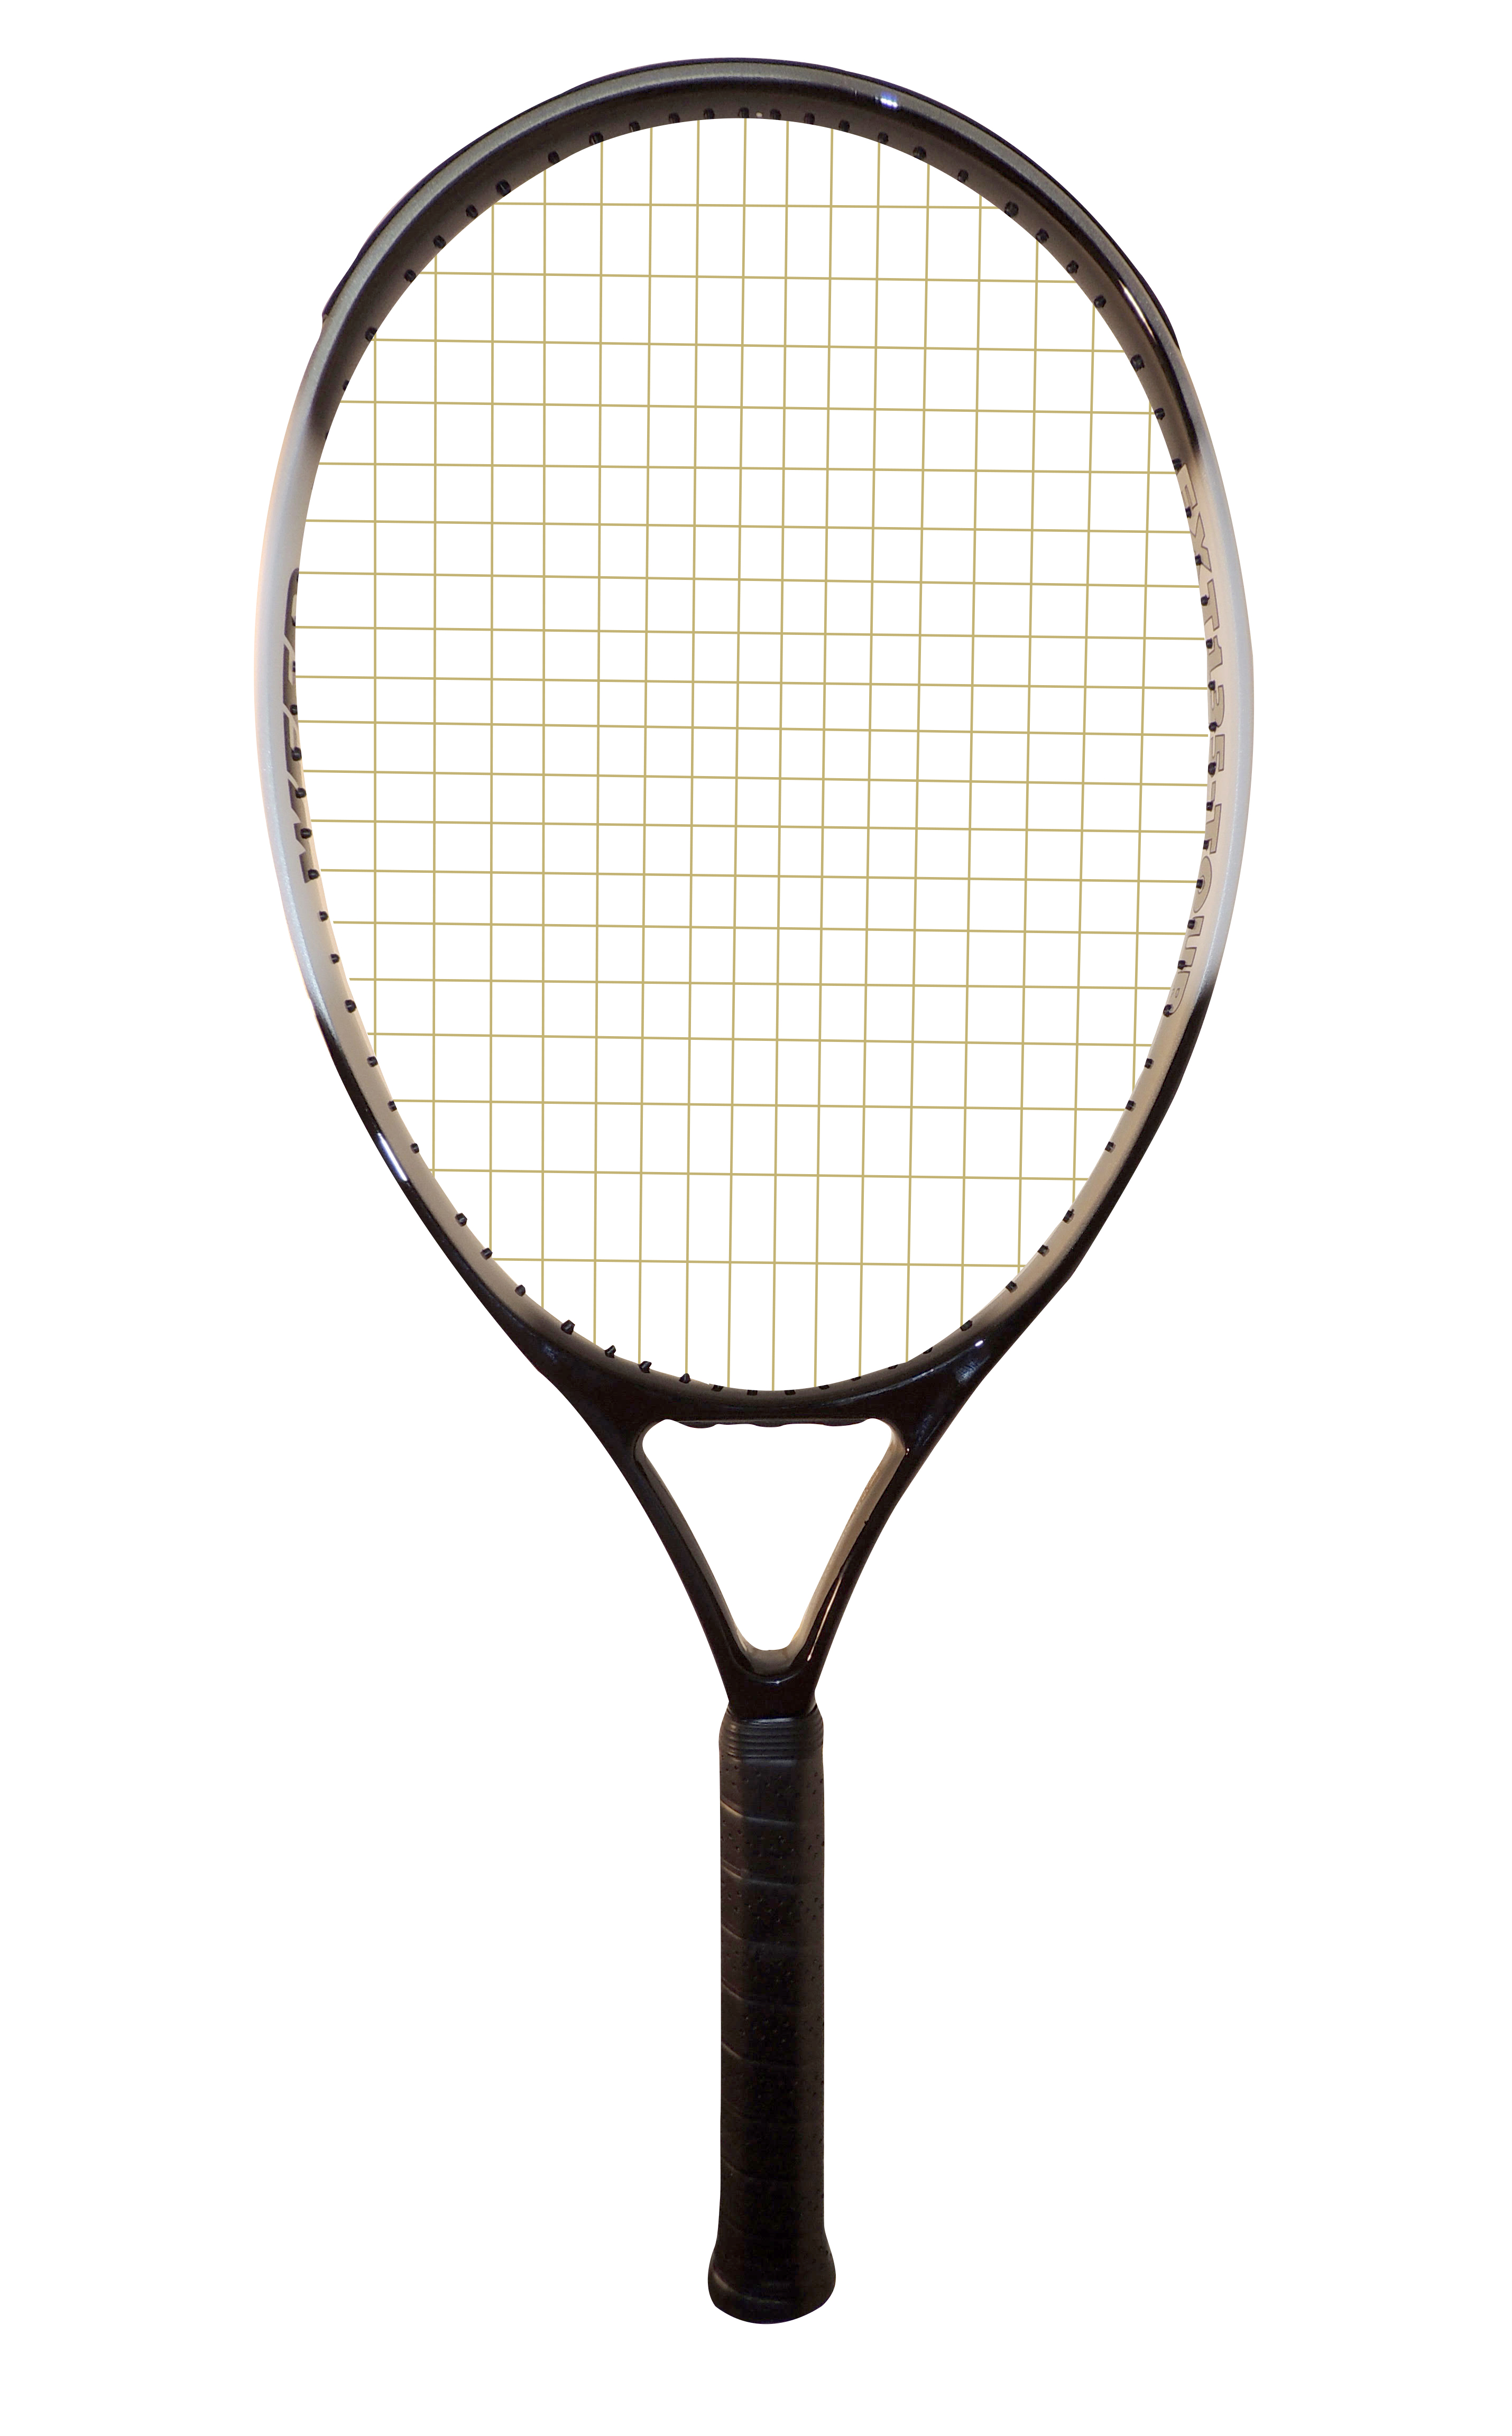 Weed Ext 135 Tour Oversized Tennis Racquet (Used)